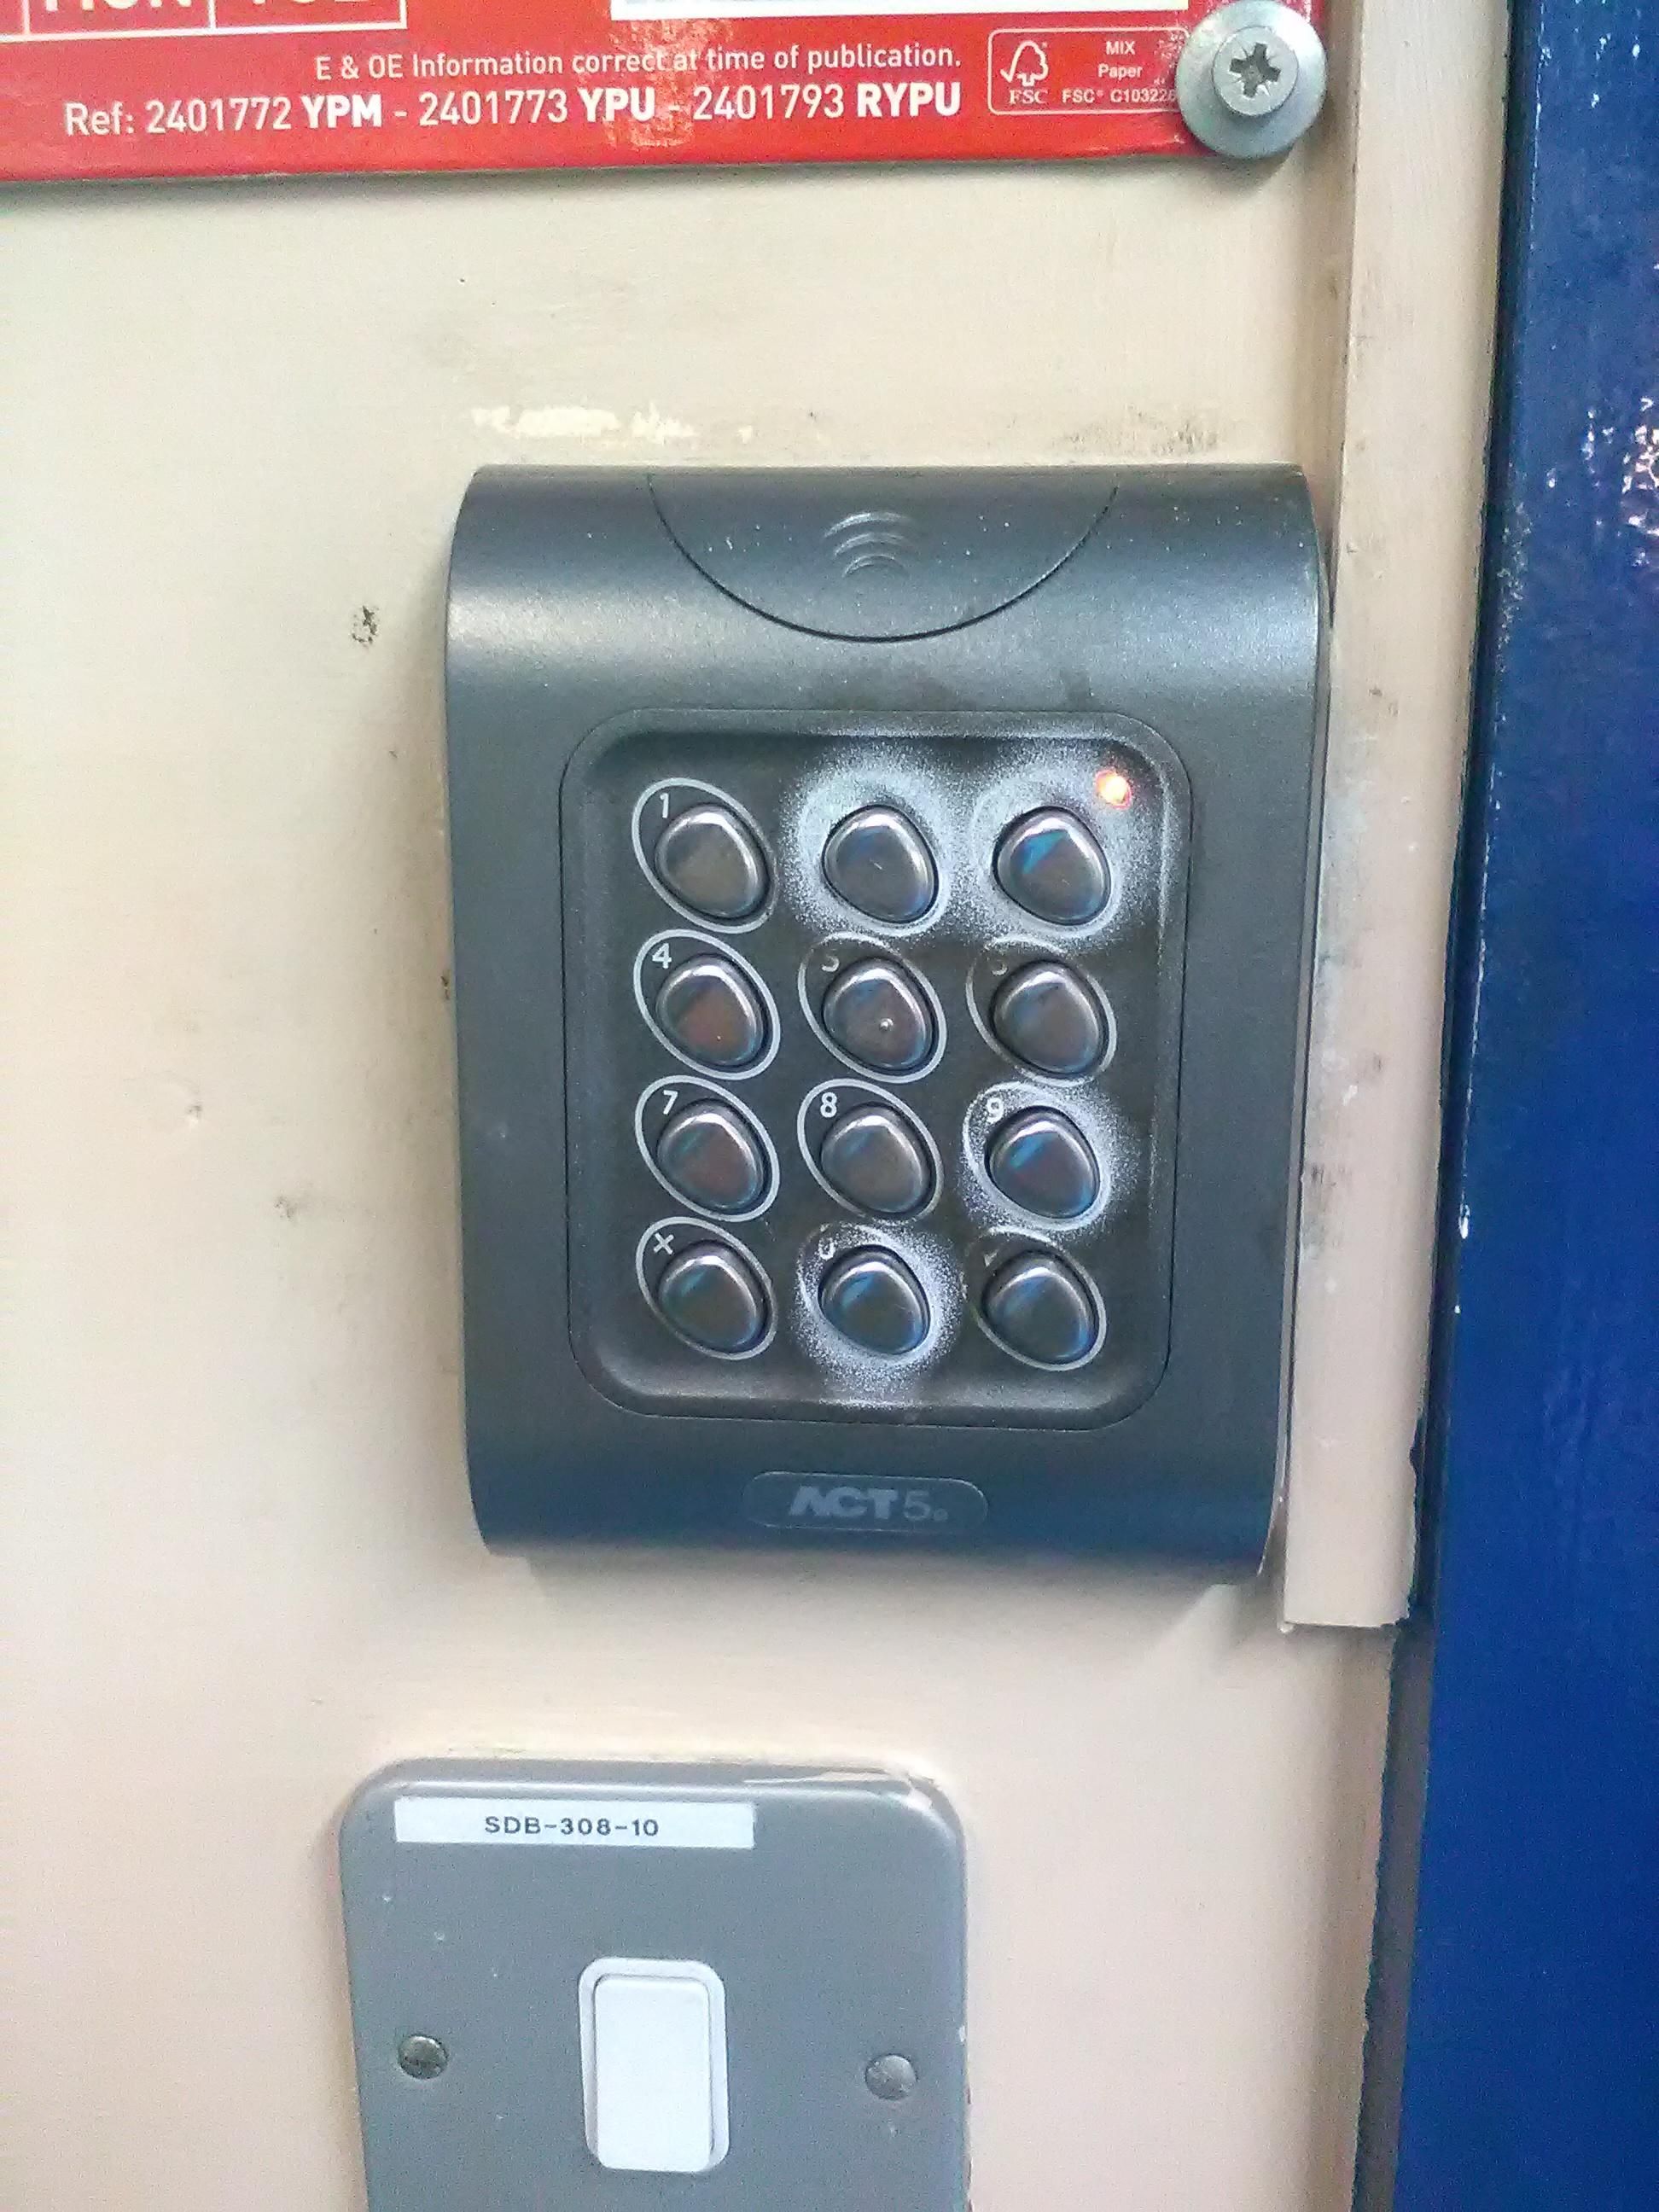 This Top secure system in my workplace.